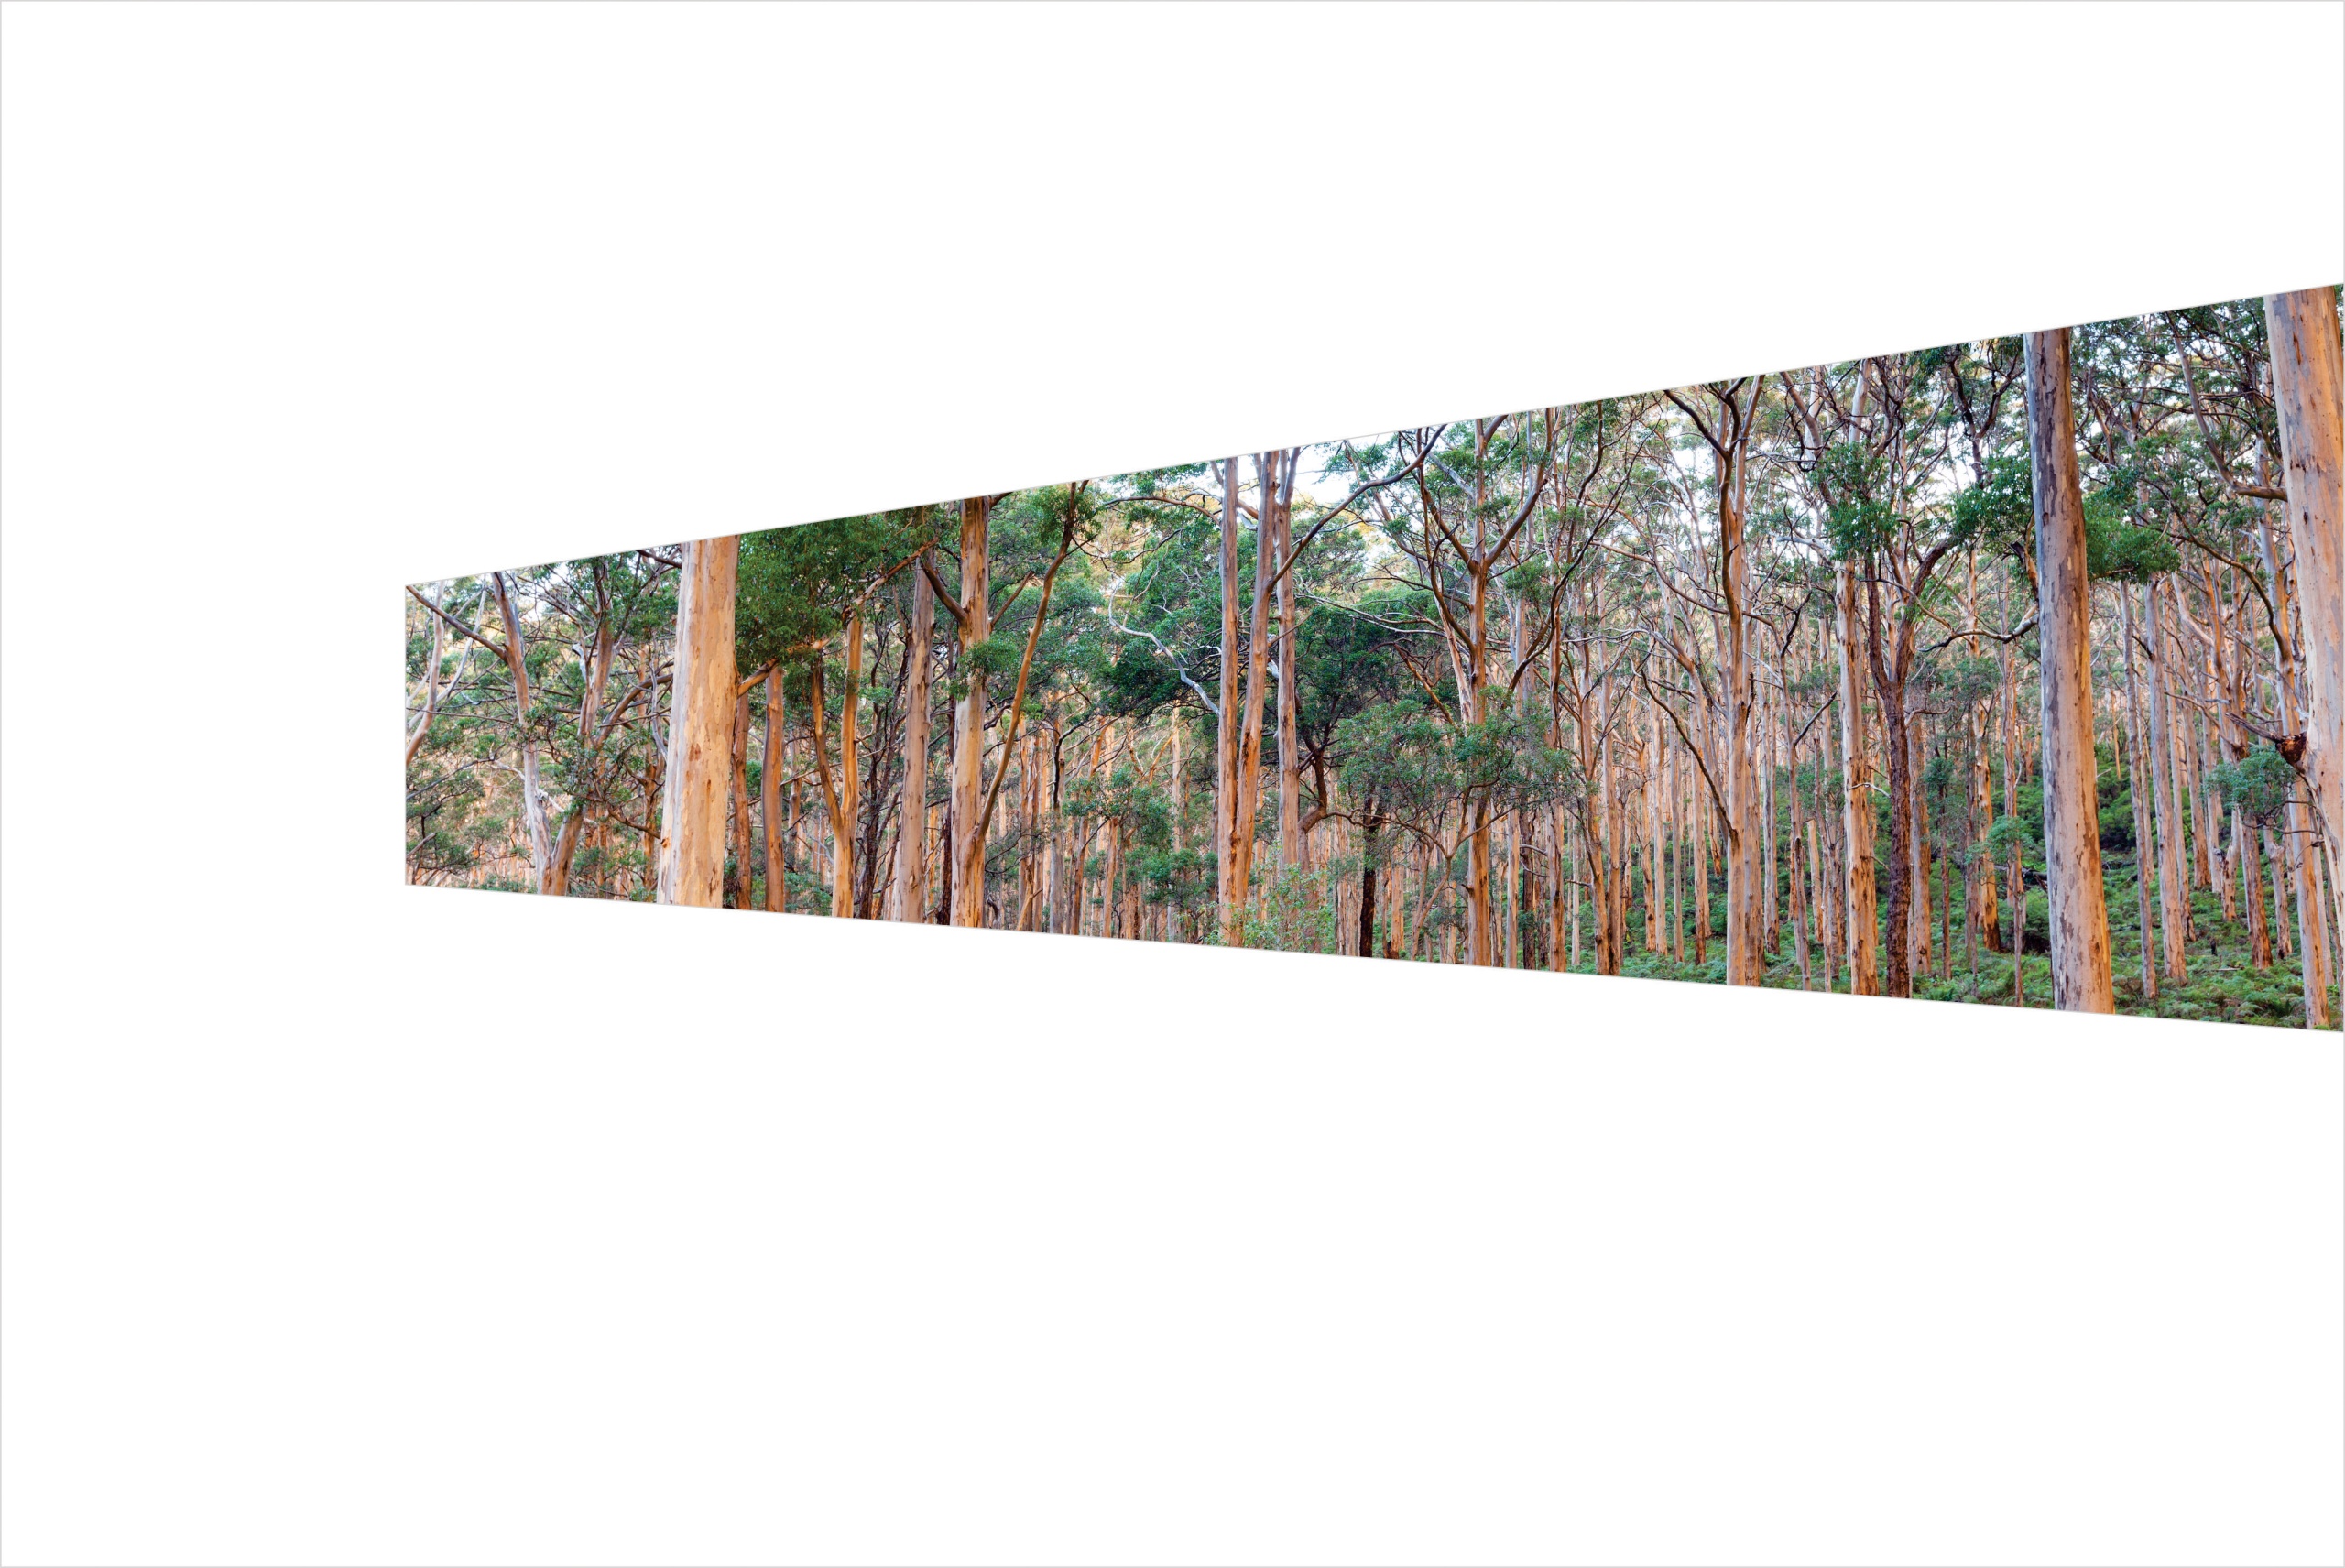 7 - Afternoon light on Gum Tree Forest 